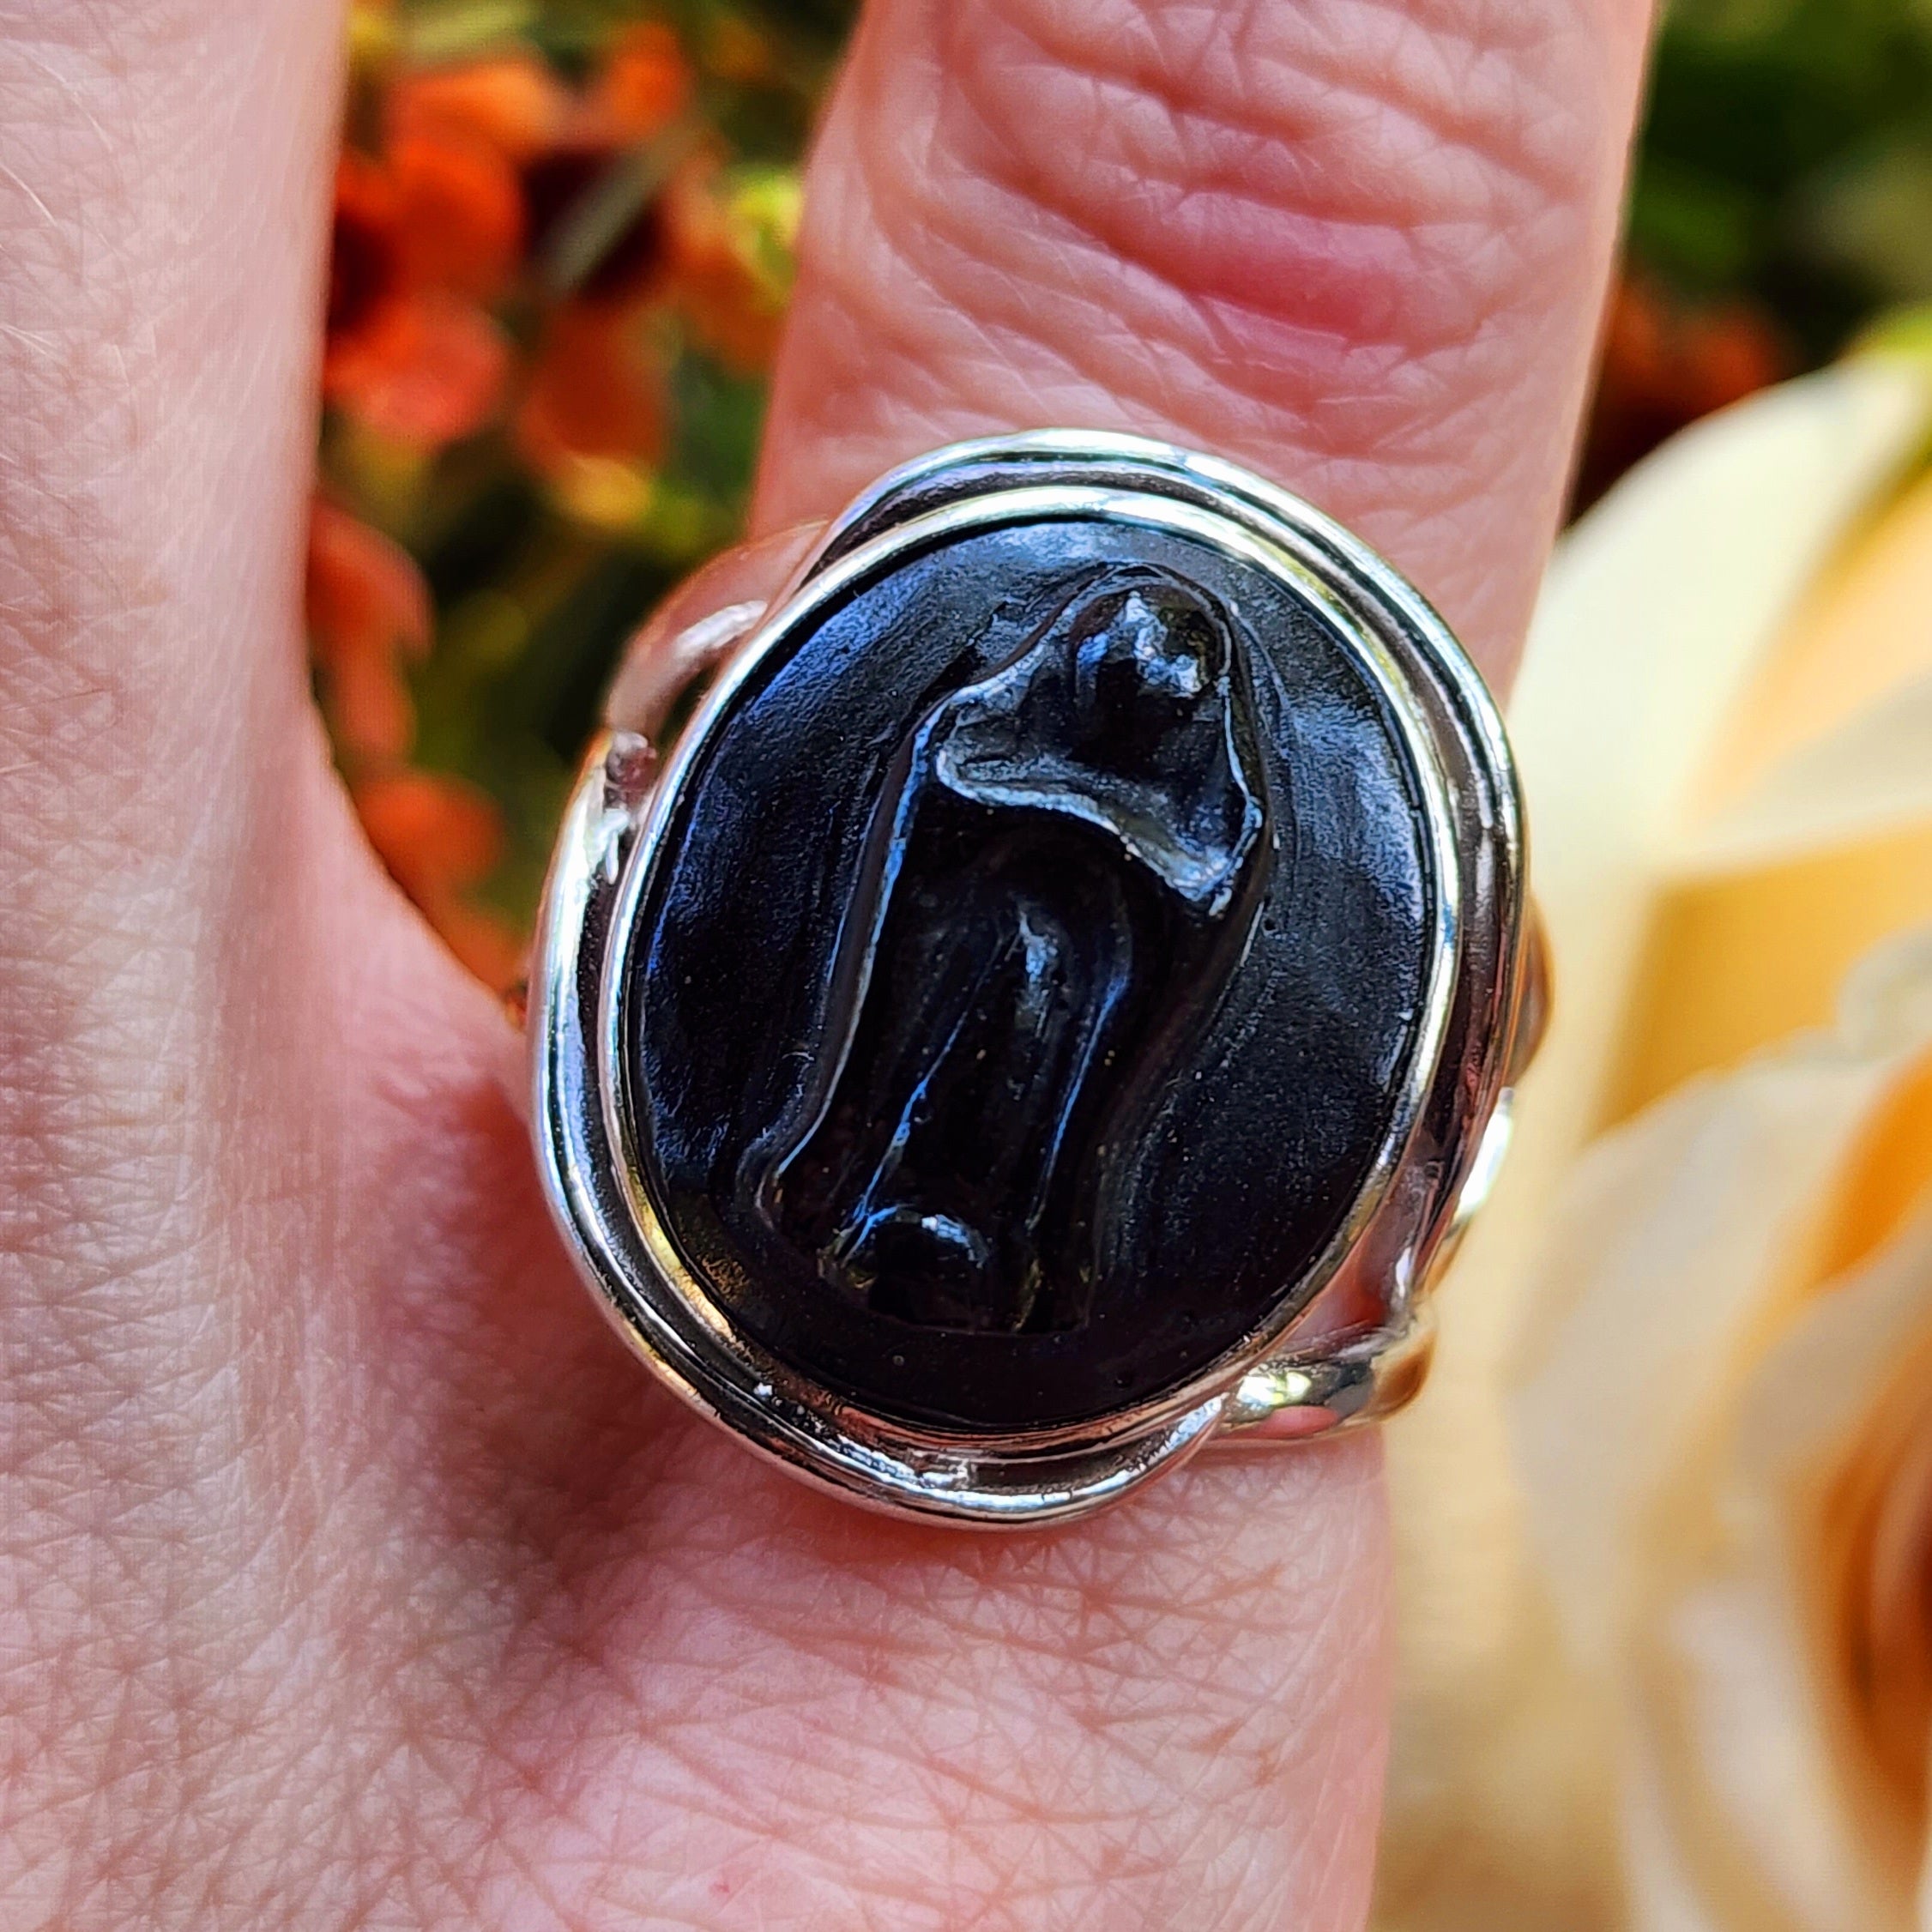 Black Obsidian Mother Mary Finger Cuff Adjustable Ring .925 Silver for Divine Guidance and Protection